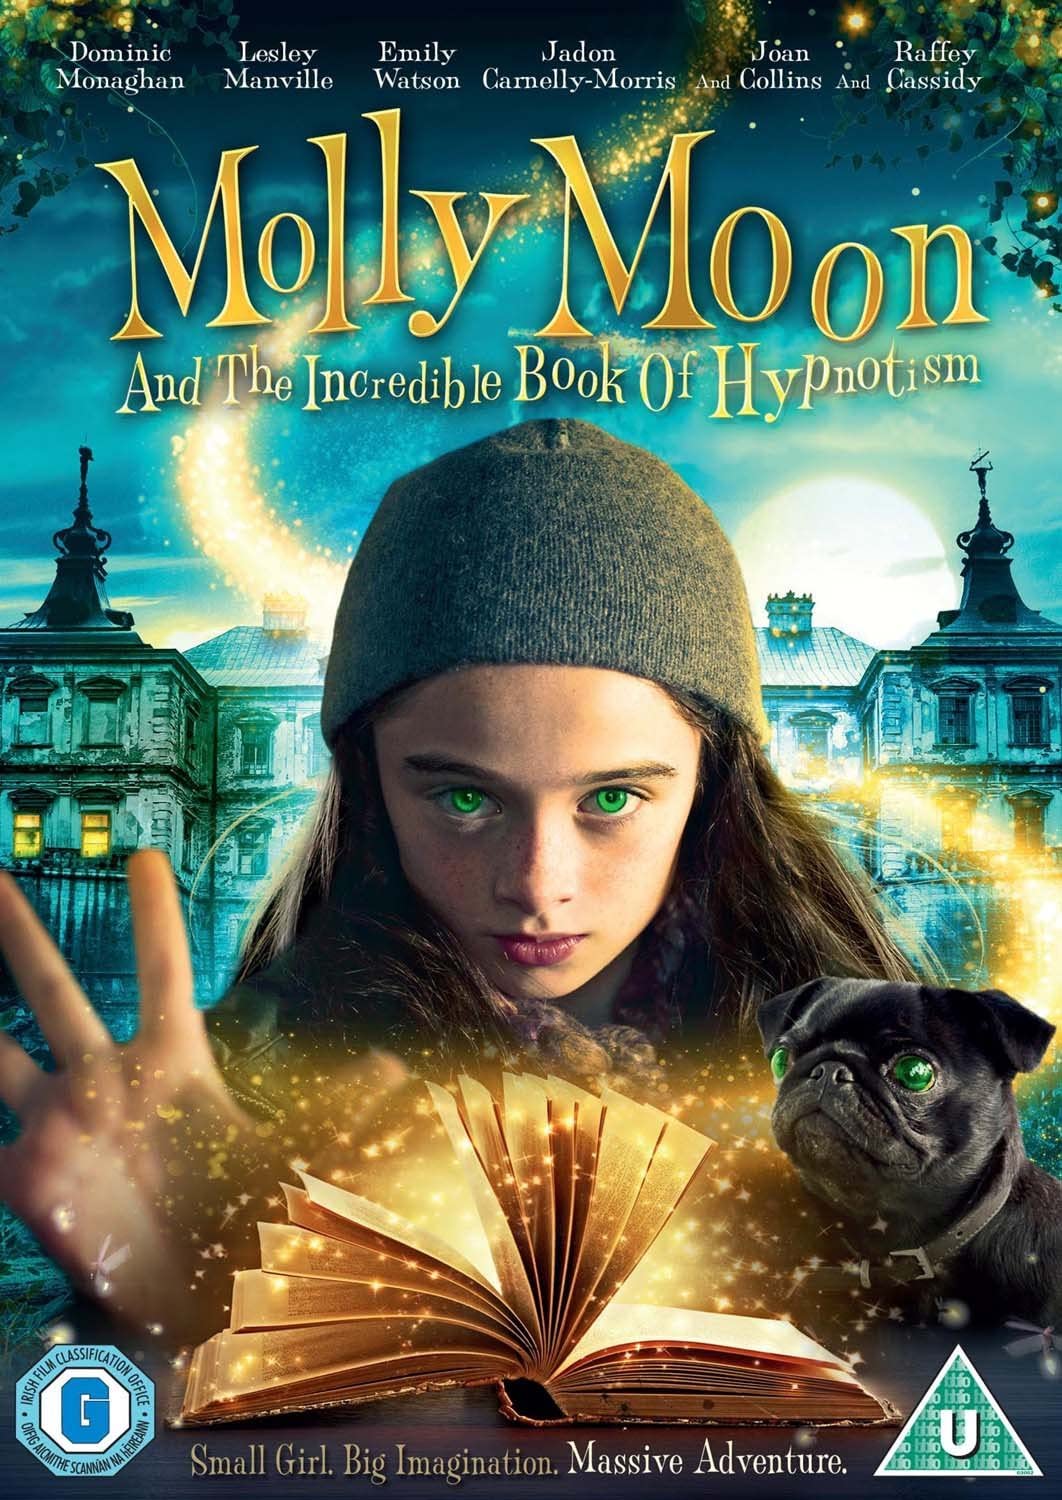 Molly Moon & The Incredible Book of Hypnotism [DVD]